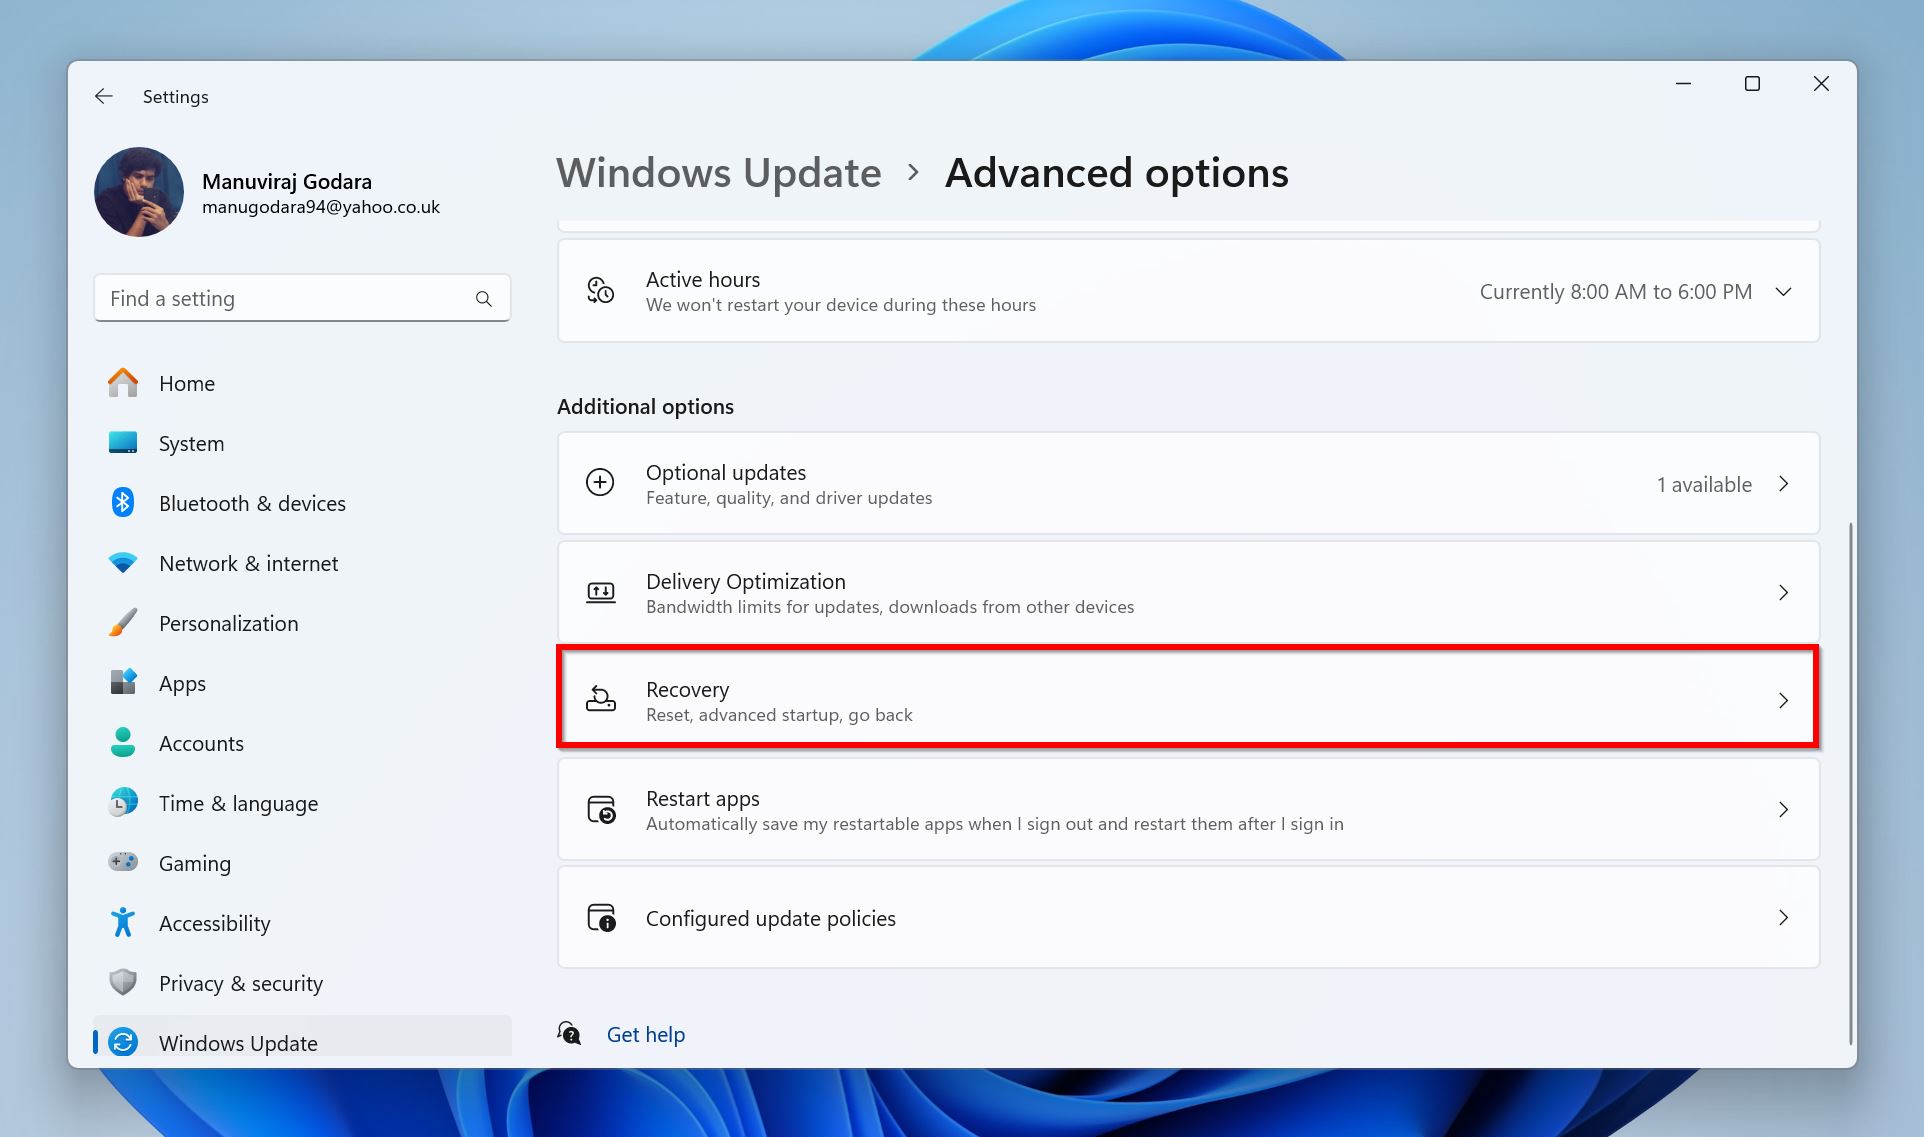 The Advanced options section within Windows Update settings. A red box surrounds the 'Recovery' option, which is listed among other additional settings like Optional updates and Delivery Optimization.